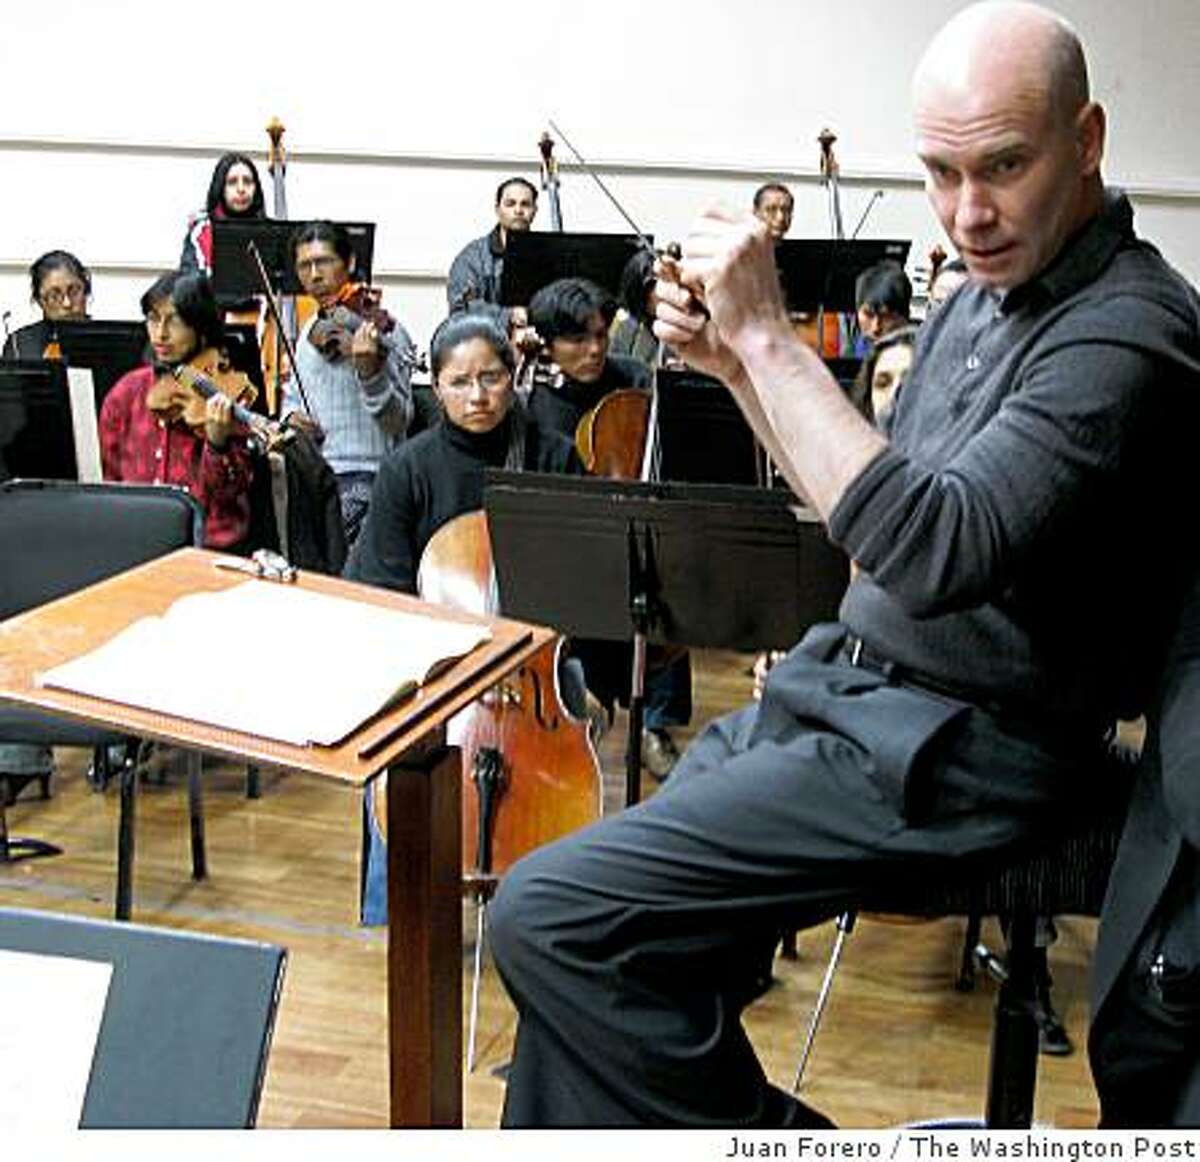 U.S. conductor David Handel has been able to teach, experiment and construct an orchestra from the ground up, and in the process bring the music he loves to barren, forgotten corners of Bolivia. Illustrates BOLIVIA (category e), by Juan Forero (c) 2008, The Washington Post. Moved Thursday, Dec. 18, 2008. (MUST CREDIT: Washington Post photo by Juan Forero.)